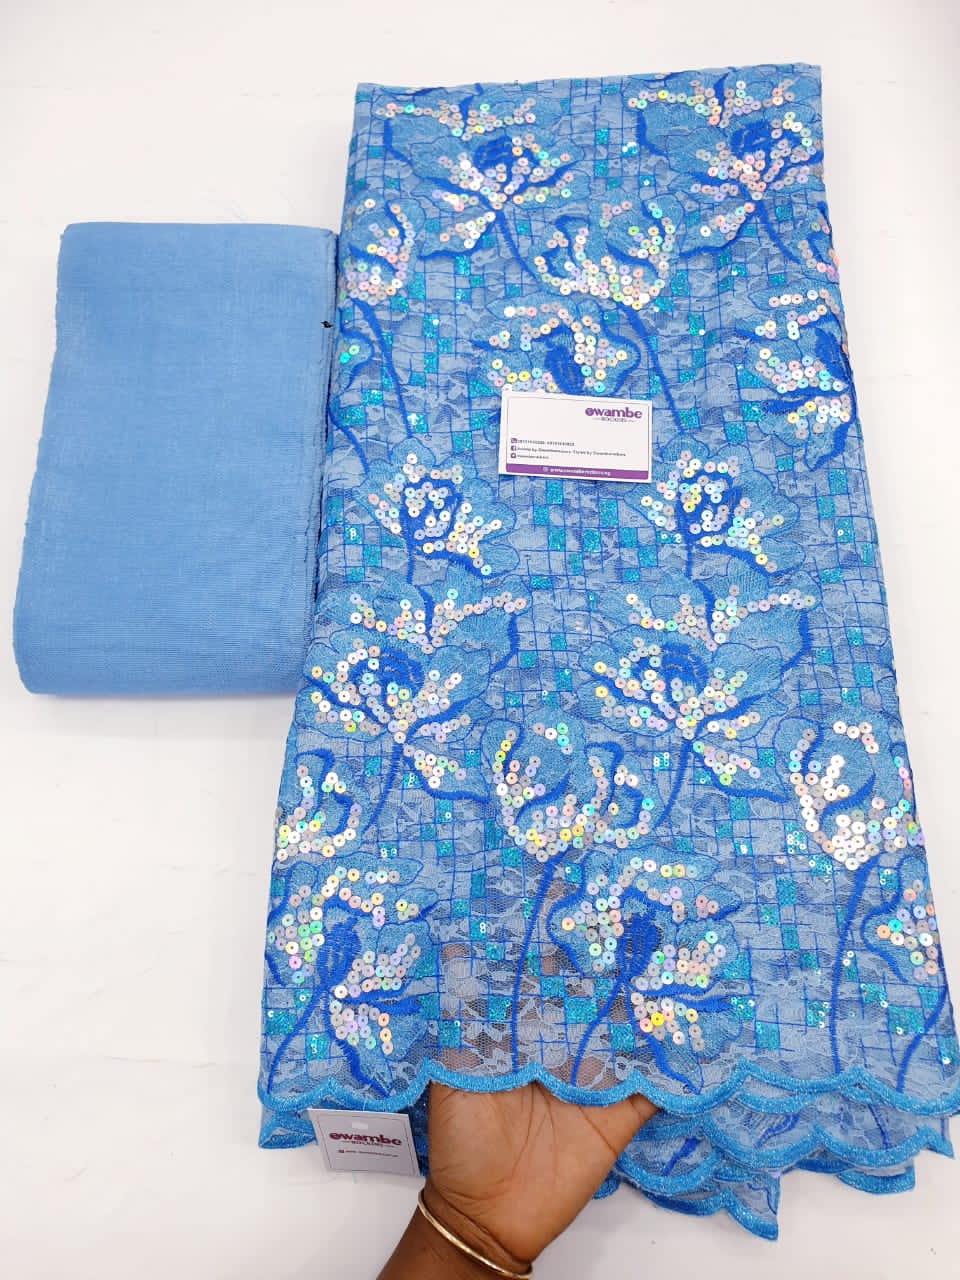 Blue Lace Material - Owambe Rockers